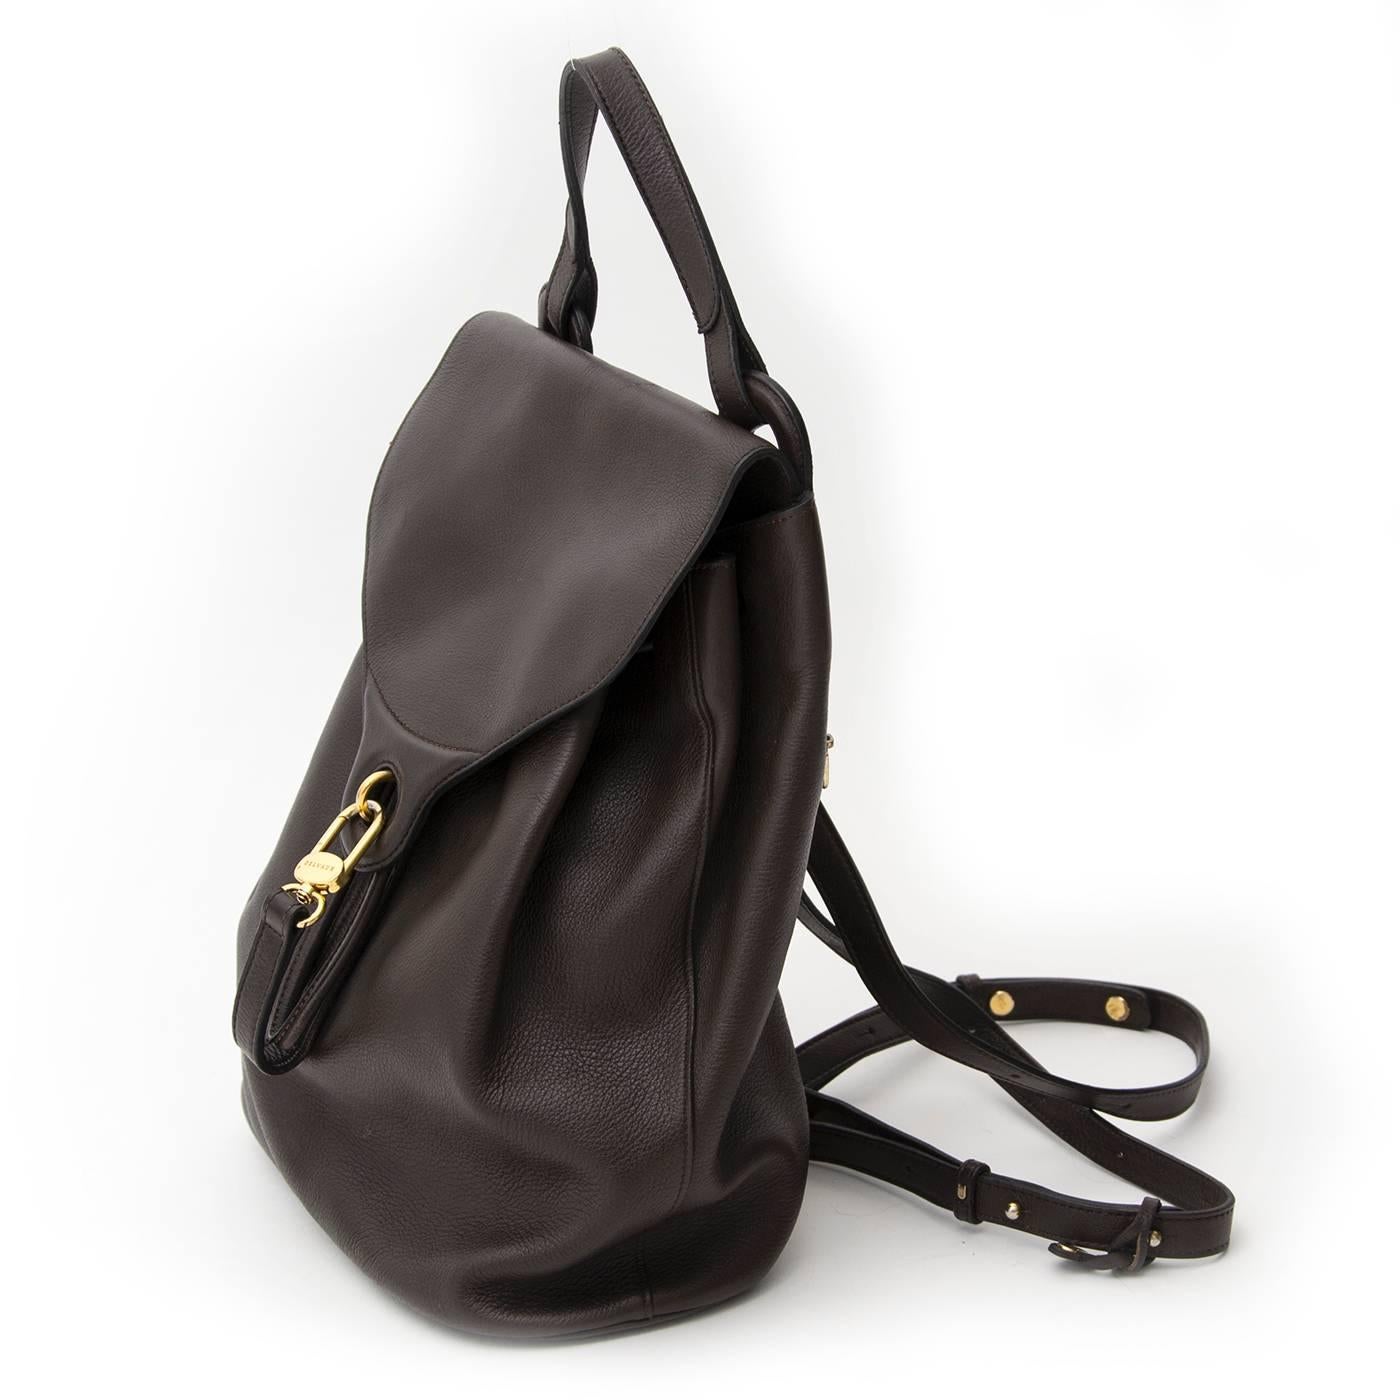 Brown backpack by Delvaux with golden hardware and a leather top handle. There's an extra compartment on the back which closes with a zipper. The shoulder straps are adjustable and therefore easy to wear. The interior is made out of suede. 